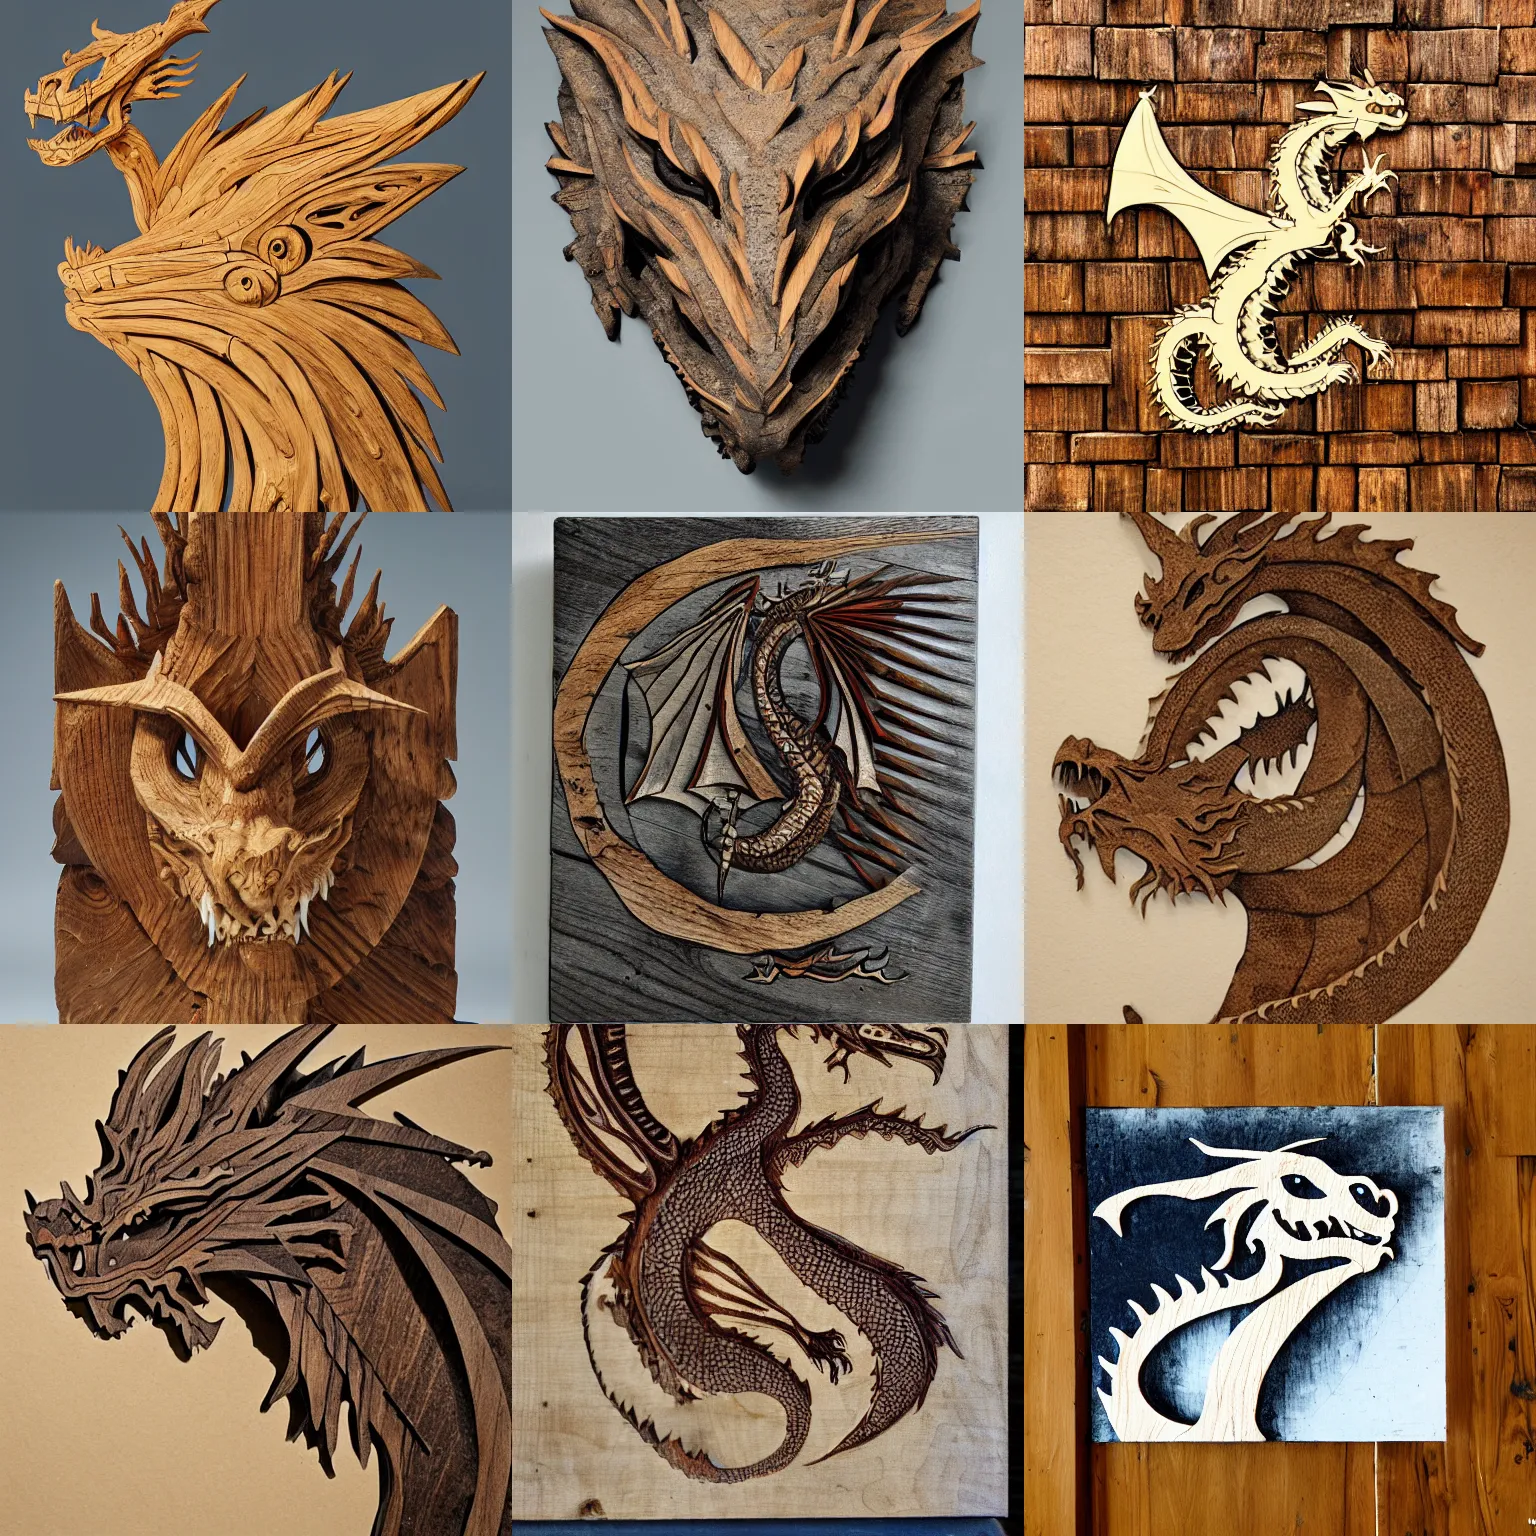 Prompt: a portrait of a dragon made of wood